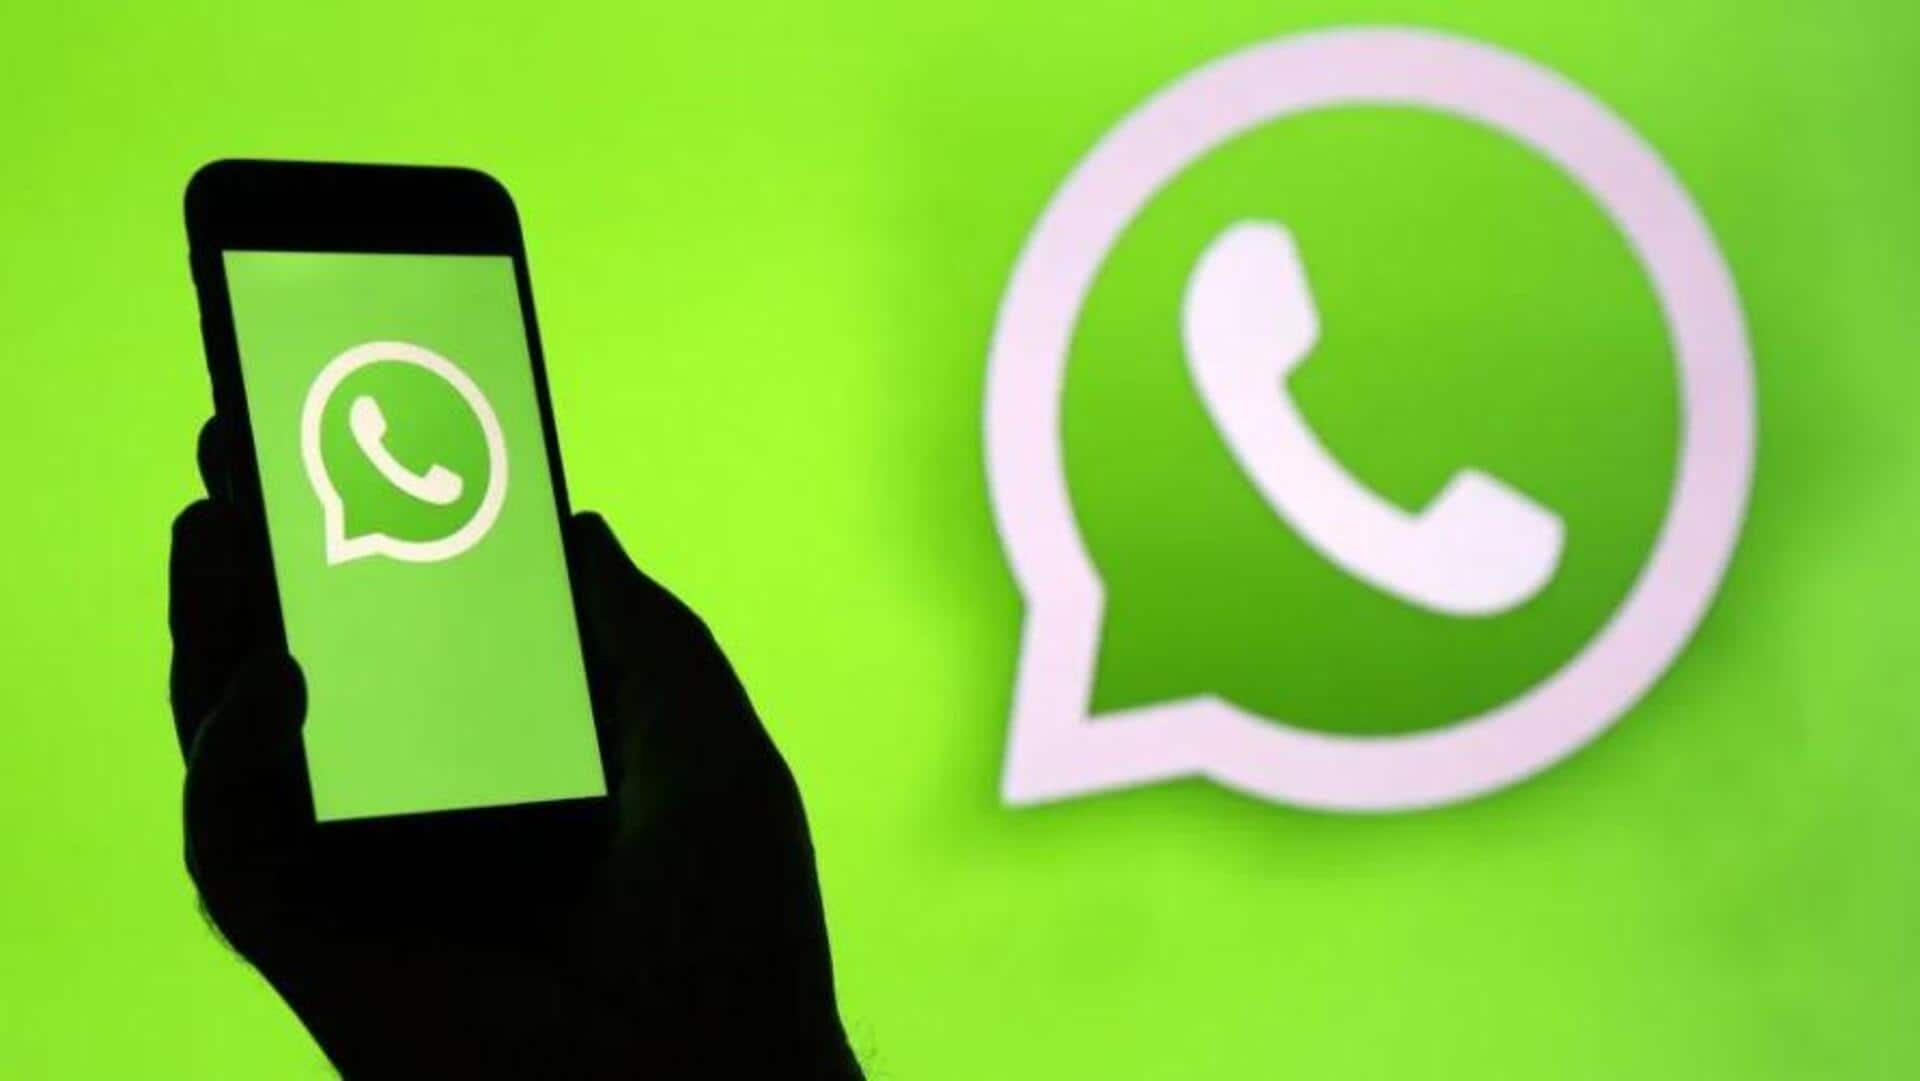 WhatsApp to soon offer voice transcription feature for Android users